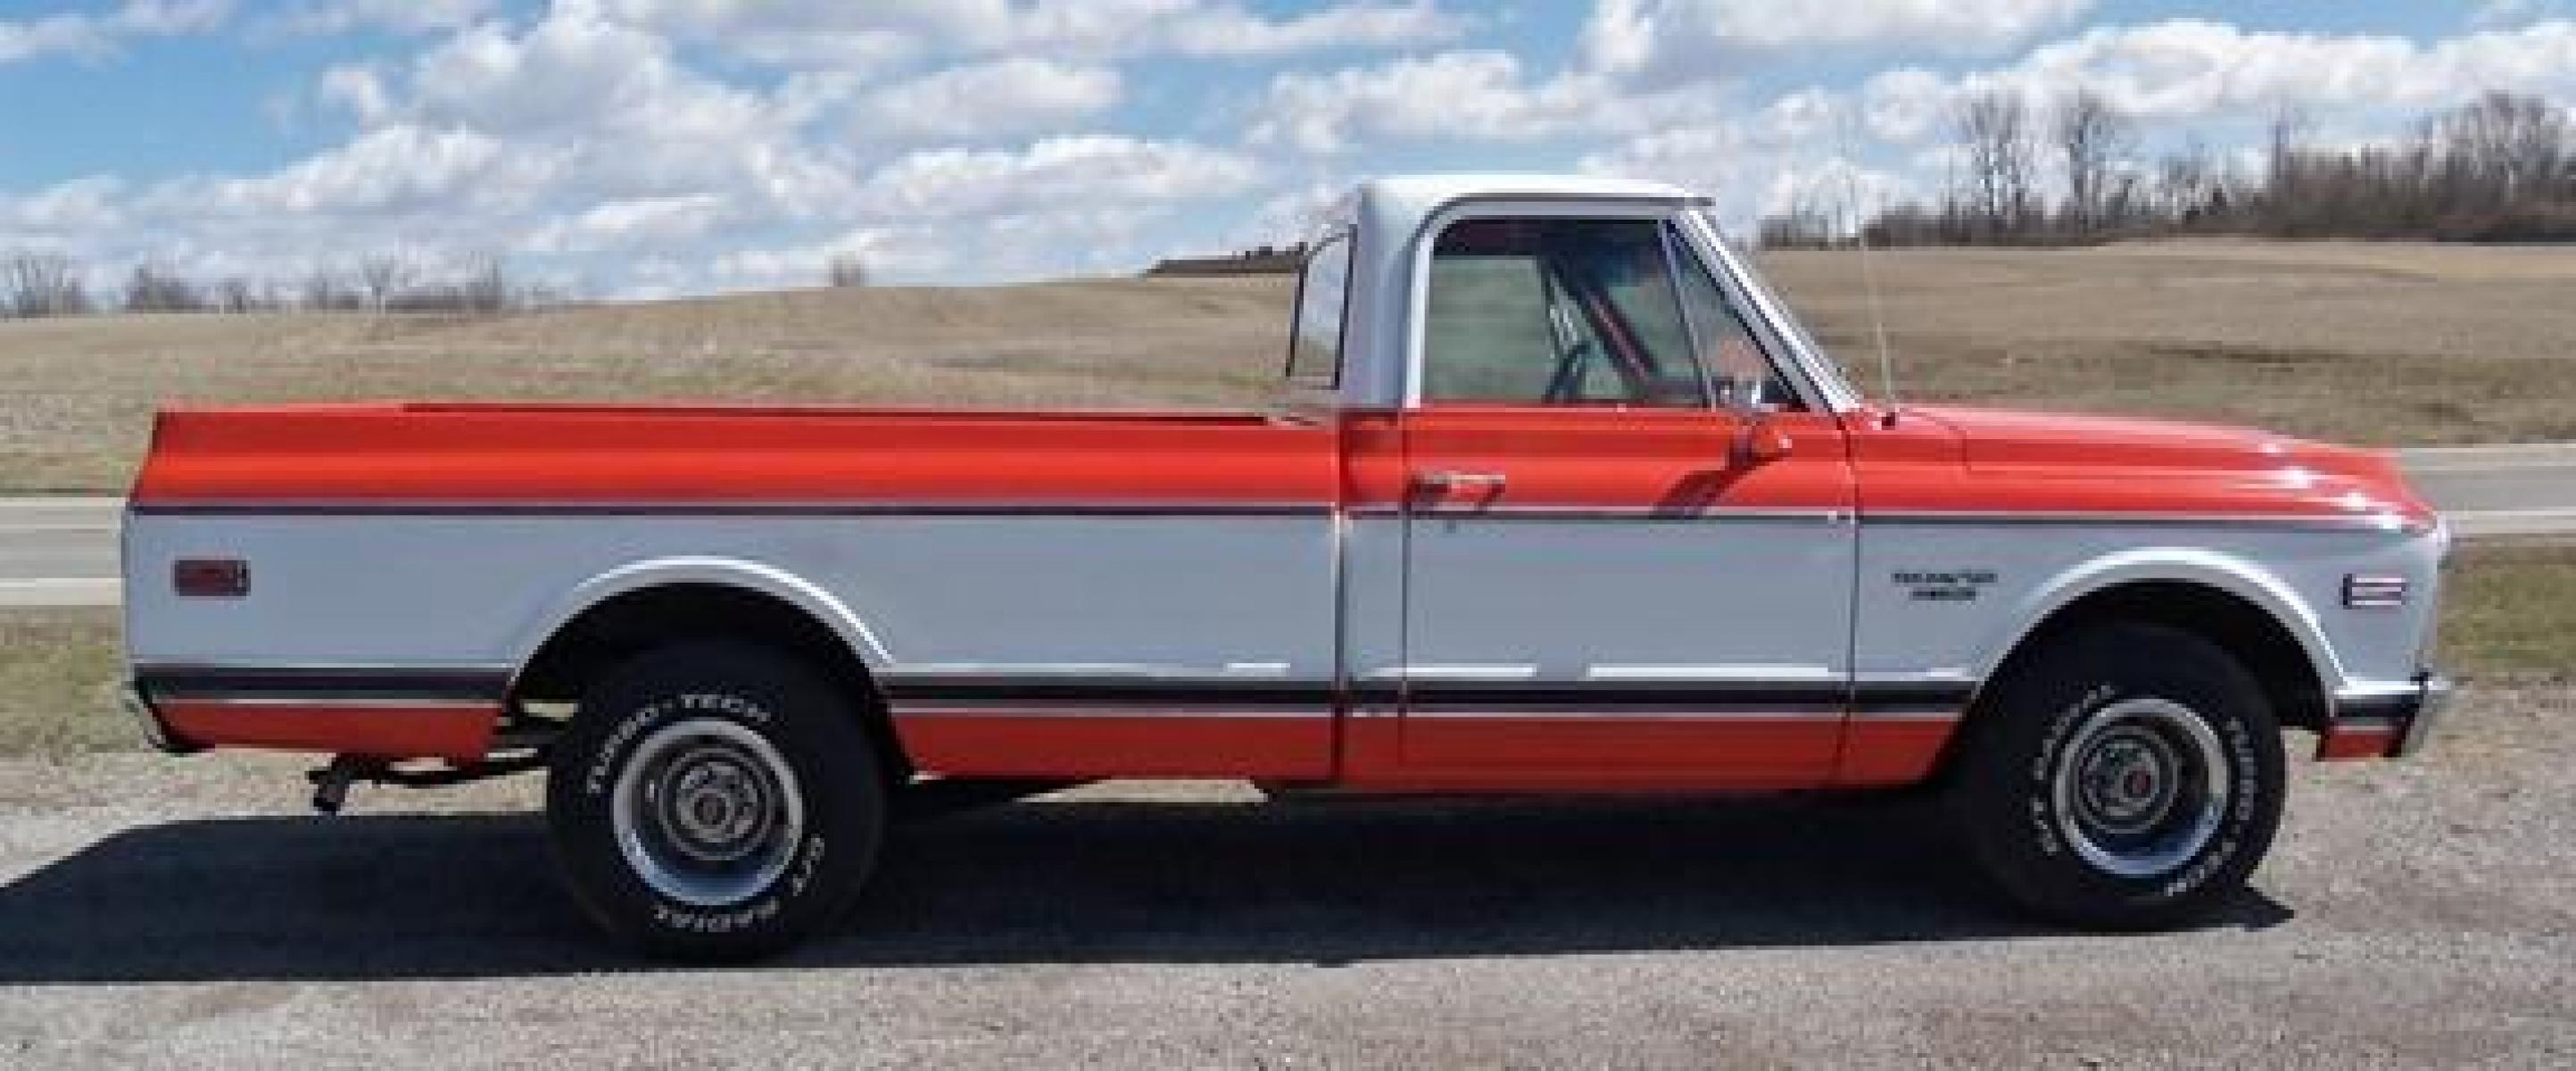 1970 Orange/White Chevrolet C10 with an 328 V8 engine, located at 1725 US-68 N, Bellefontaine, OH, 43311, (937) 592-5466, 40.387783, -83.752388 - 1970 CHEVROLET C10 CUSTOM ½ T Pick-up, High-performance “383 Stroker” V-8 w-headers Auto, Orange w-white Inserts, Black Lth Interior, custom wood steering wheel, PS, PB, Retro AM-FM-CD, gauges, dual exhaust, rally rims w-white letter tires, chrome bumpers & grille, Bed mat.	. Professionally wet - Photo #6